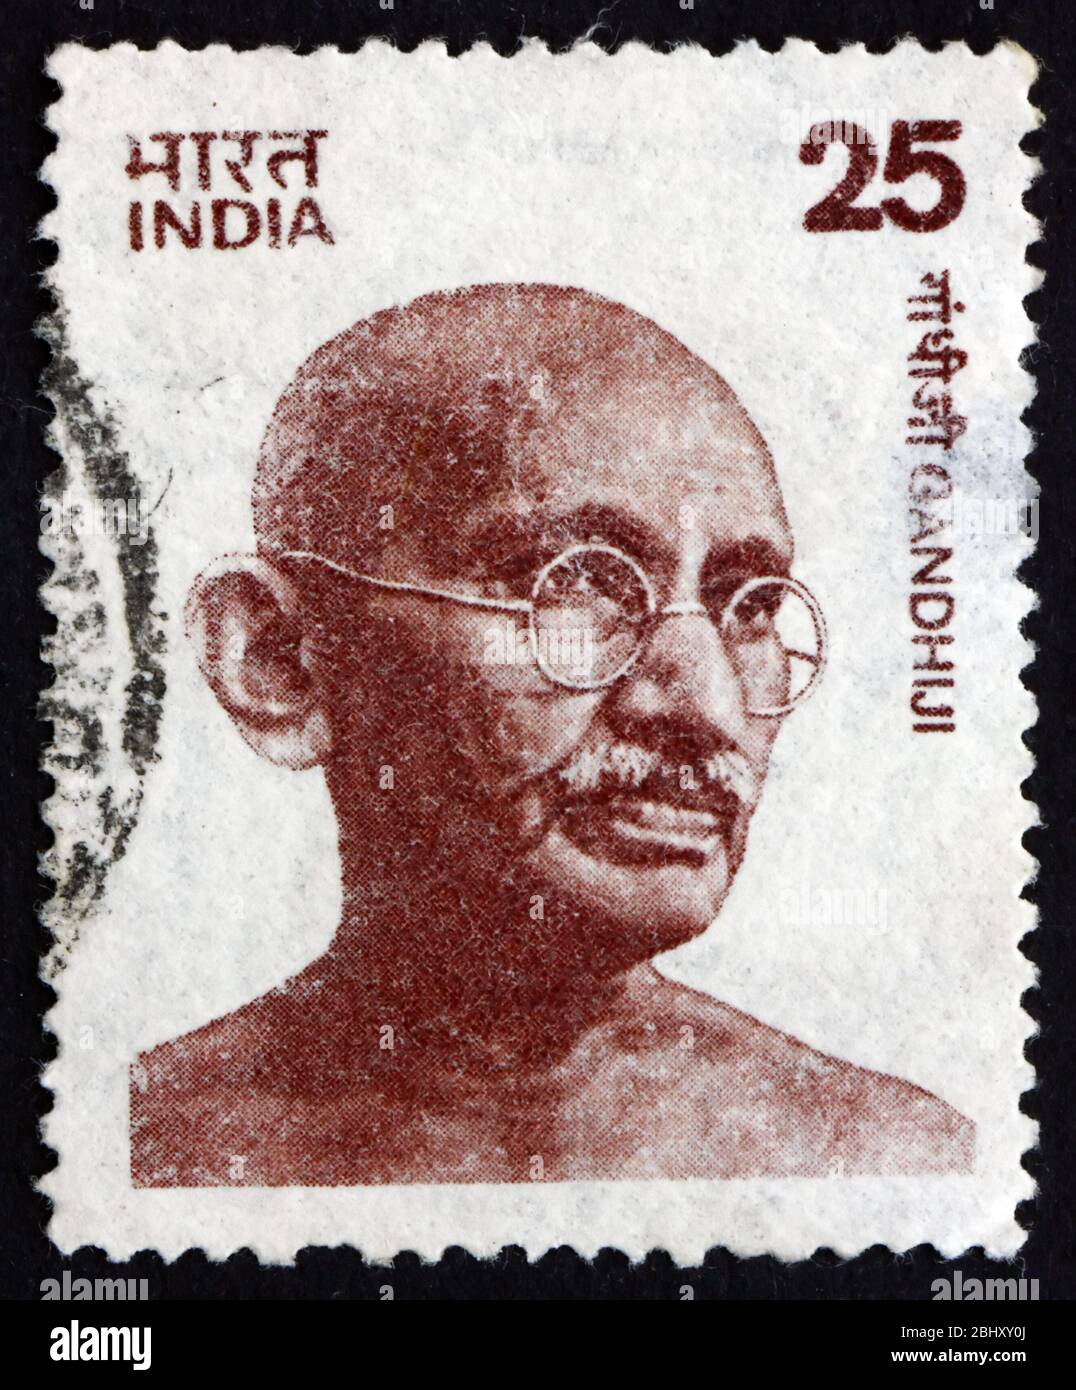 INDIA - CIRCA 1979: a stamp printed in India shows Mahatma Gandhi, portrait, leader of Indian independence movement in British-ruled India, circa 1979 Stock Photo